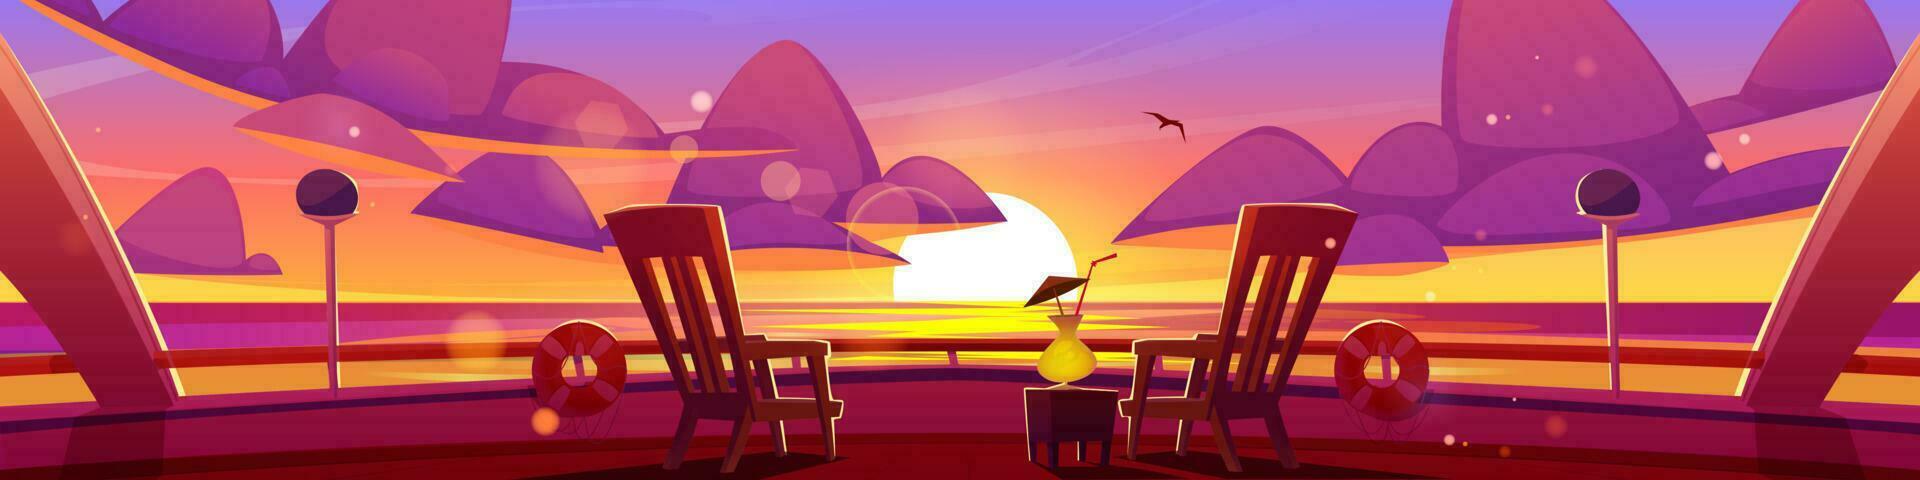 Sunset sea view from cruise ship deck cartoon vector